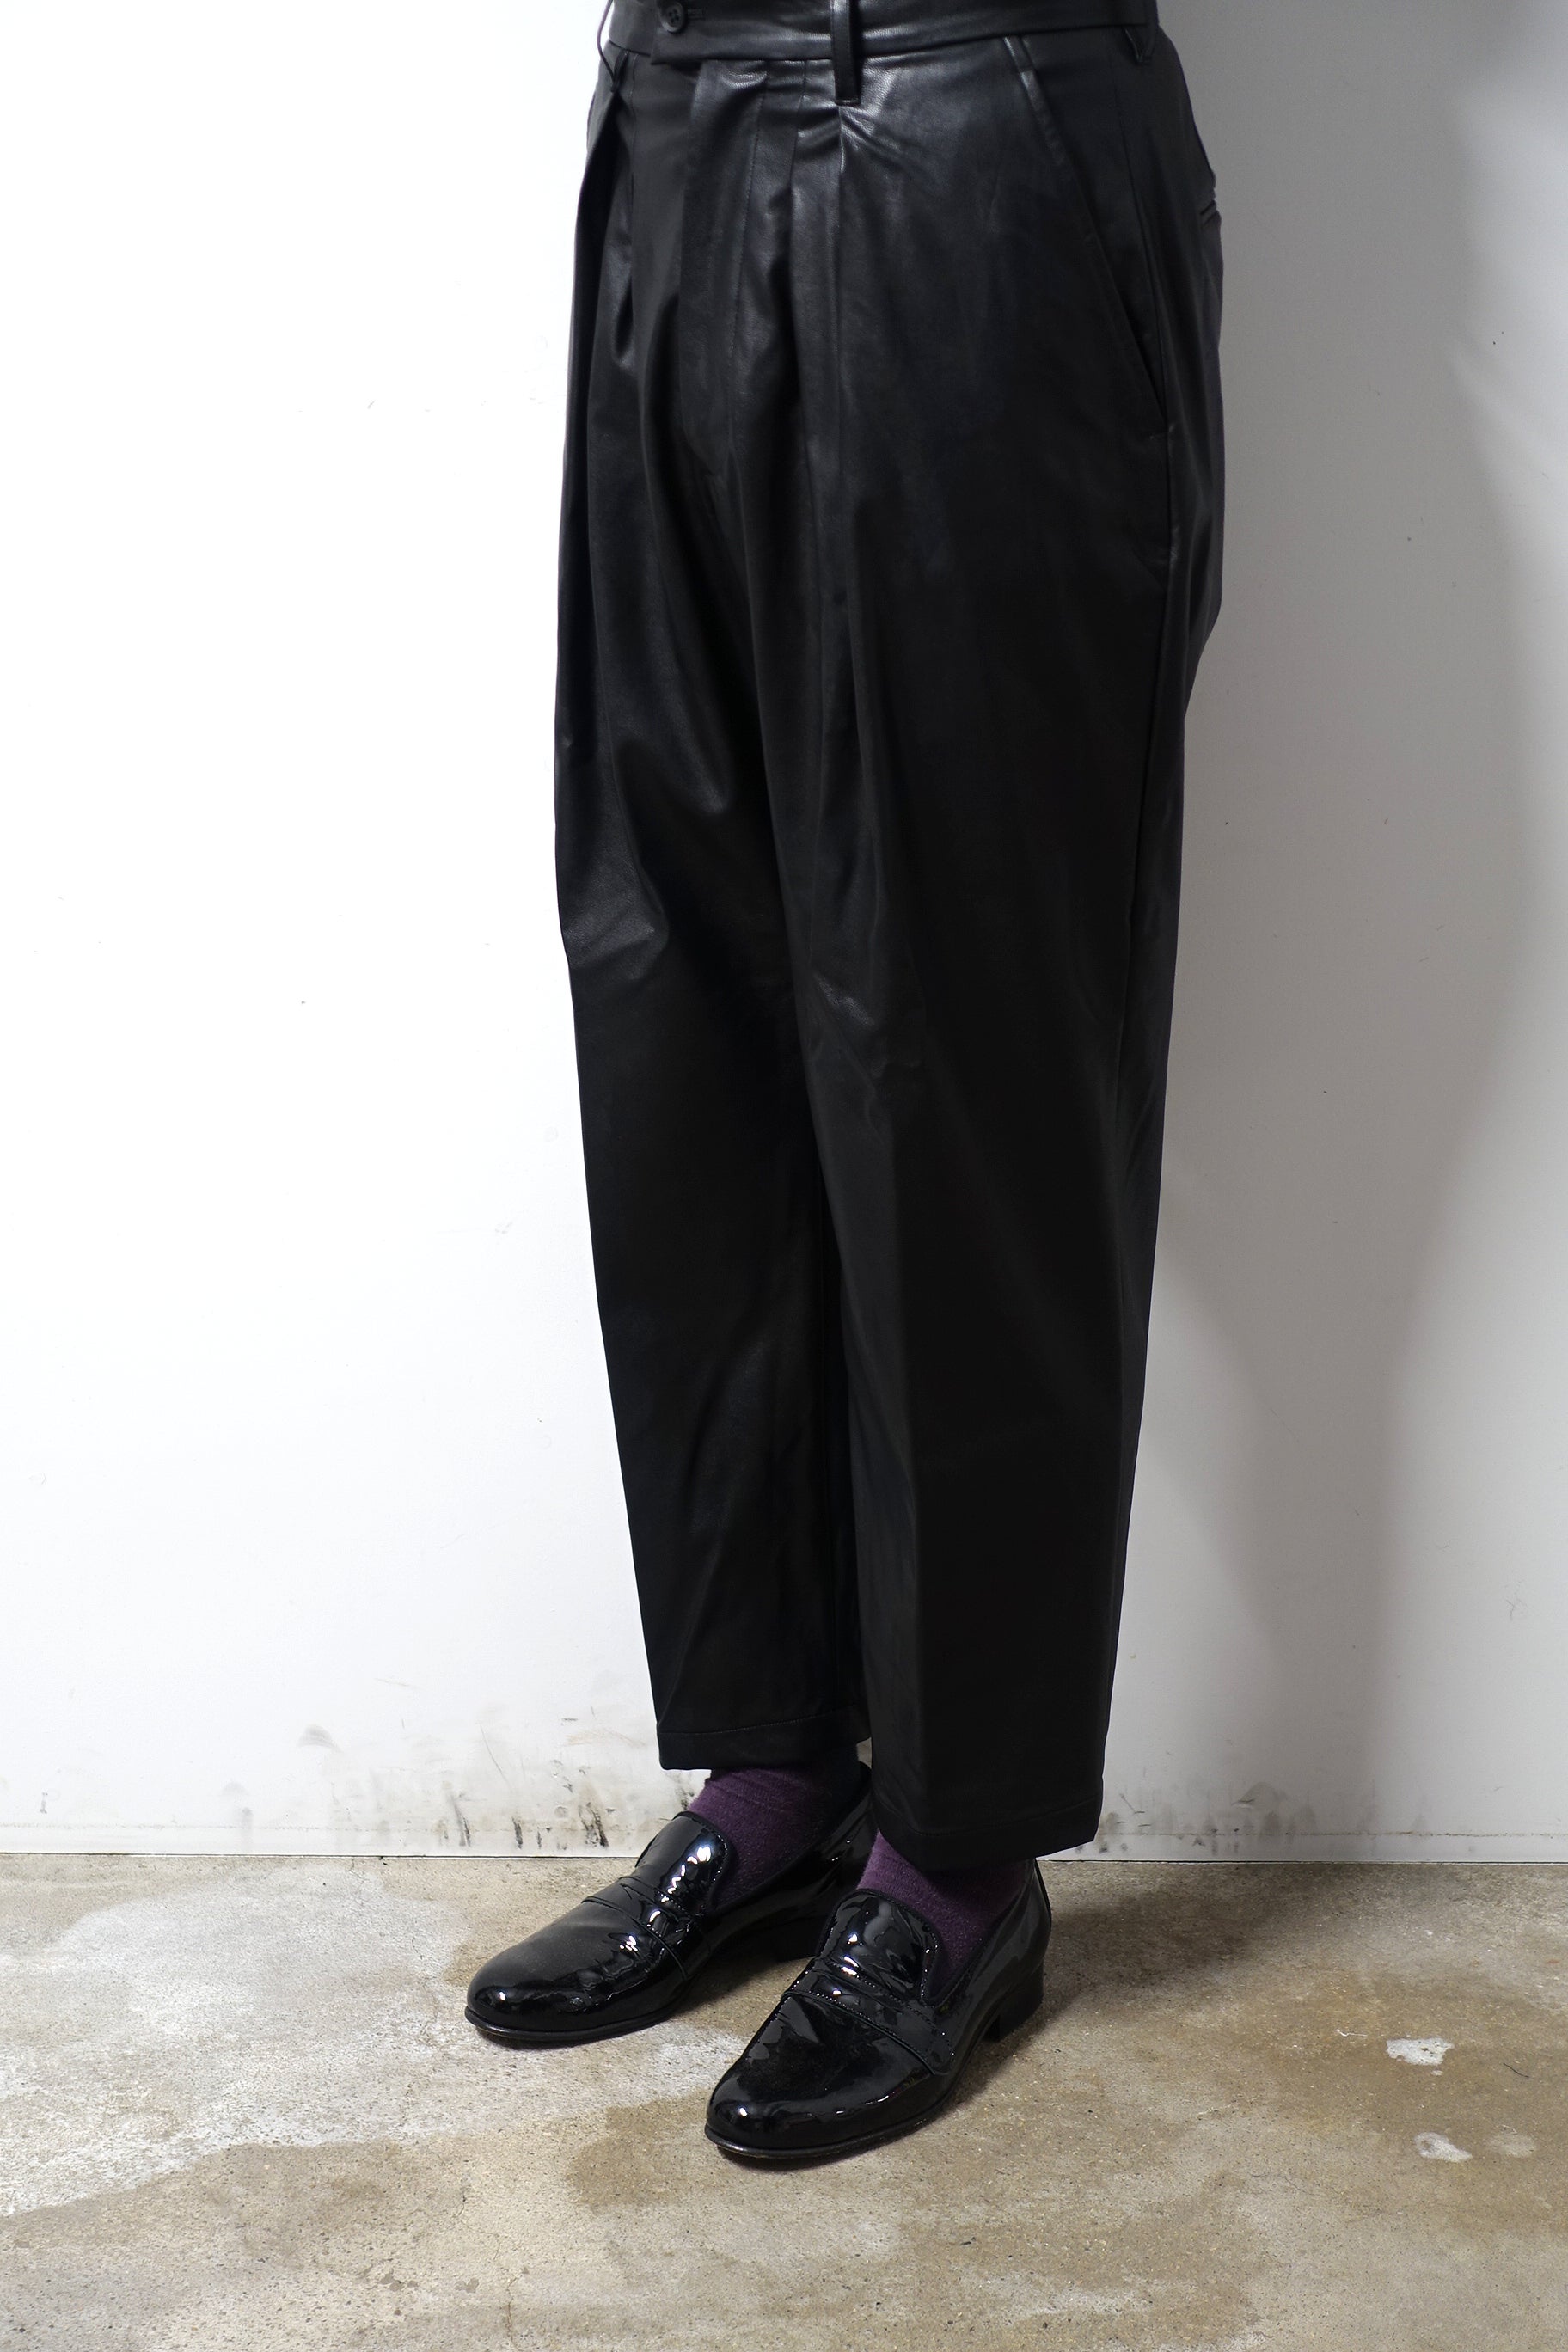 stein(シュタイン)/EX WIDE TAPERED TROUSERS/Black 通販 取り扱い